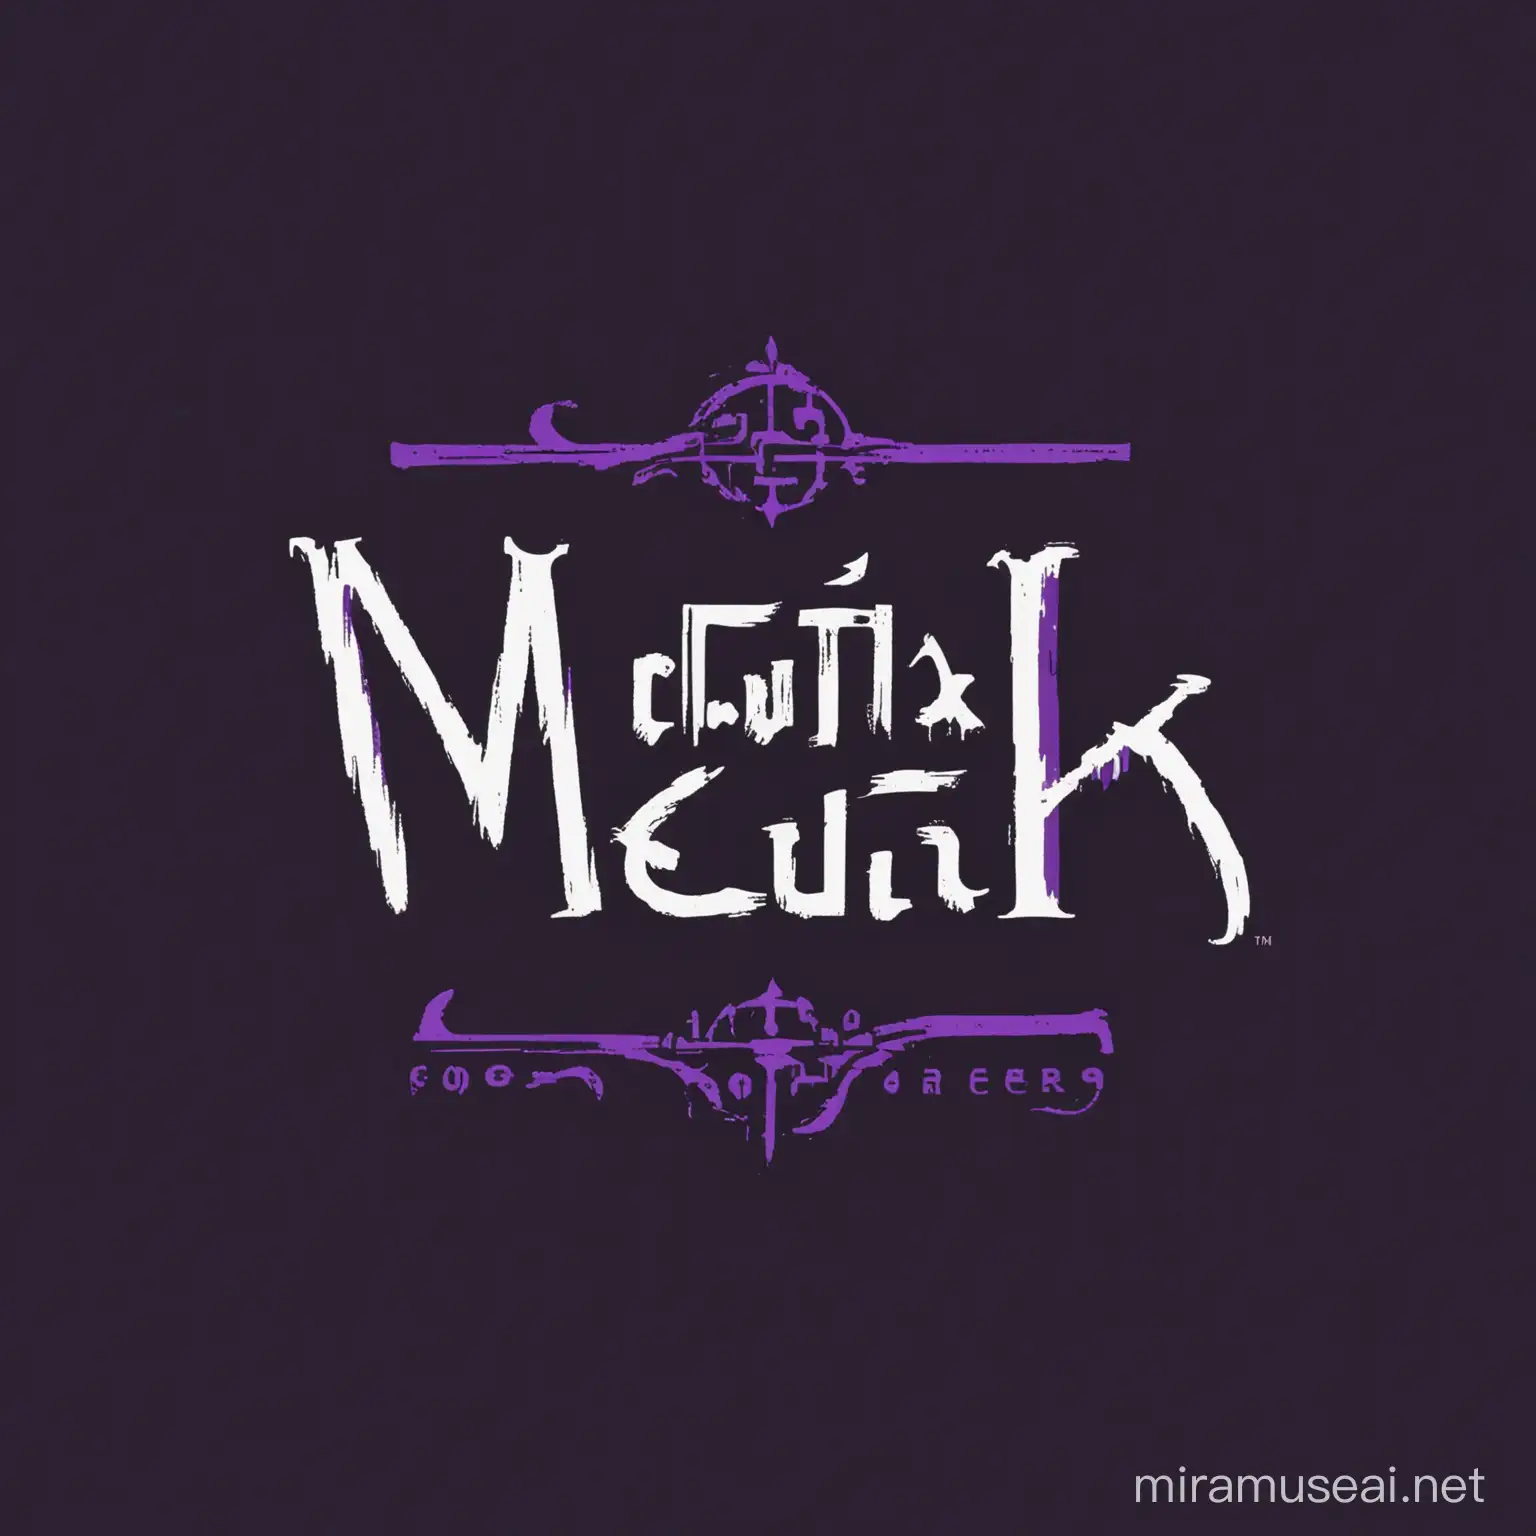  small logo sized as 64x64 pixels for a pgogrammer with nickname "Meorwik", also in dark purple and black colors